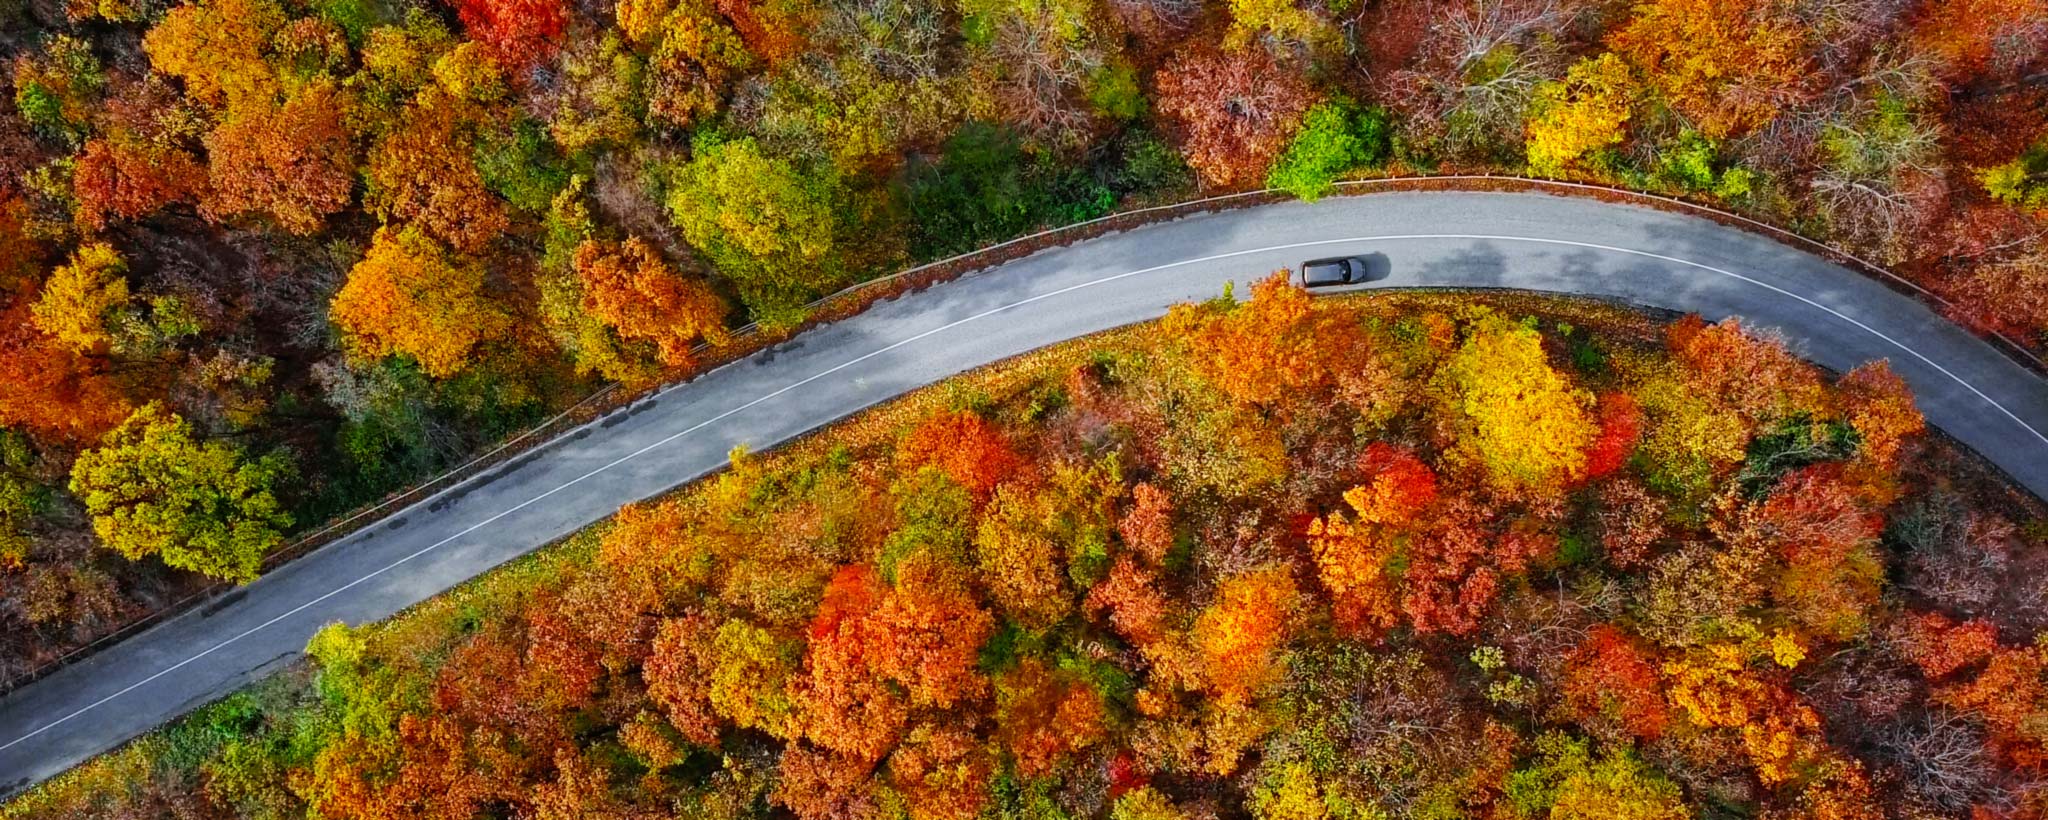 Aerial view of winding mountain road inside colorful autumn forest